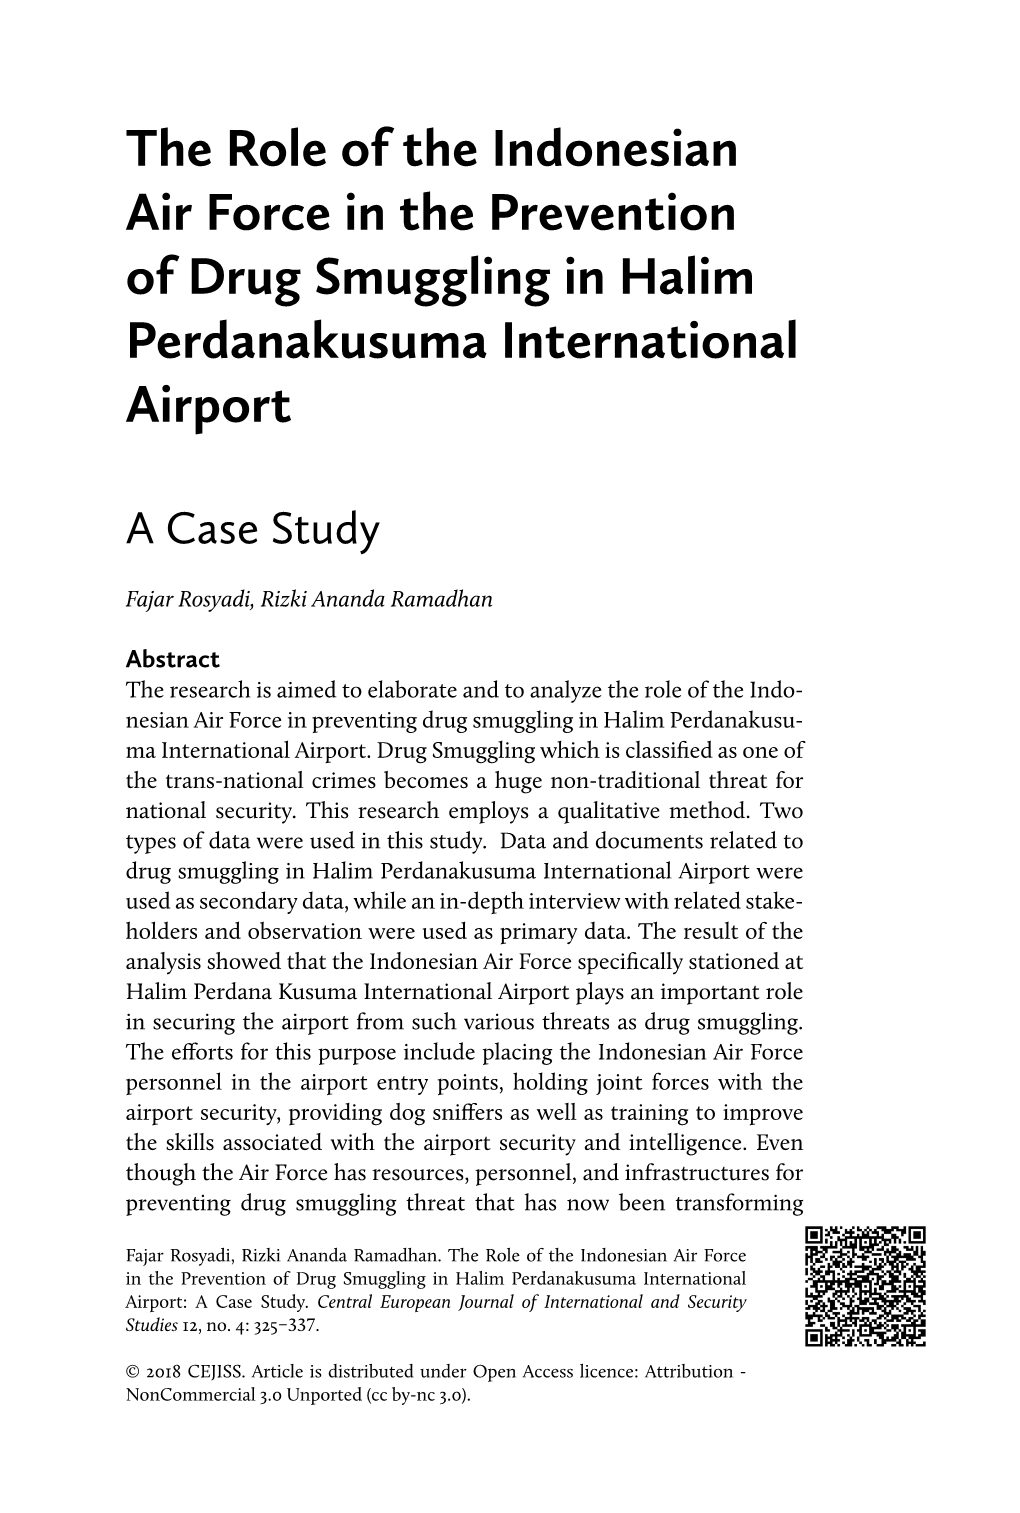 The Role of the Indonesian Air Force in the Prevention of Drug Smuggling in Halim Perdanakusuma International Airport